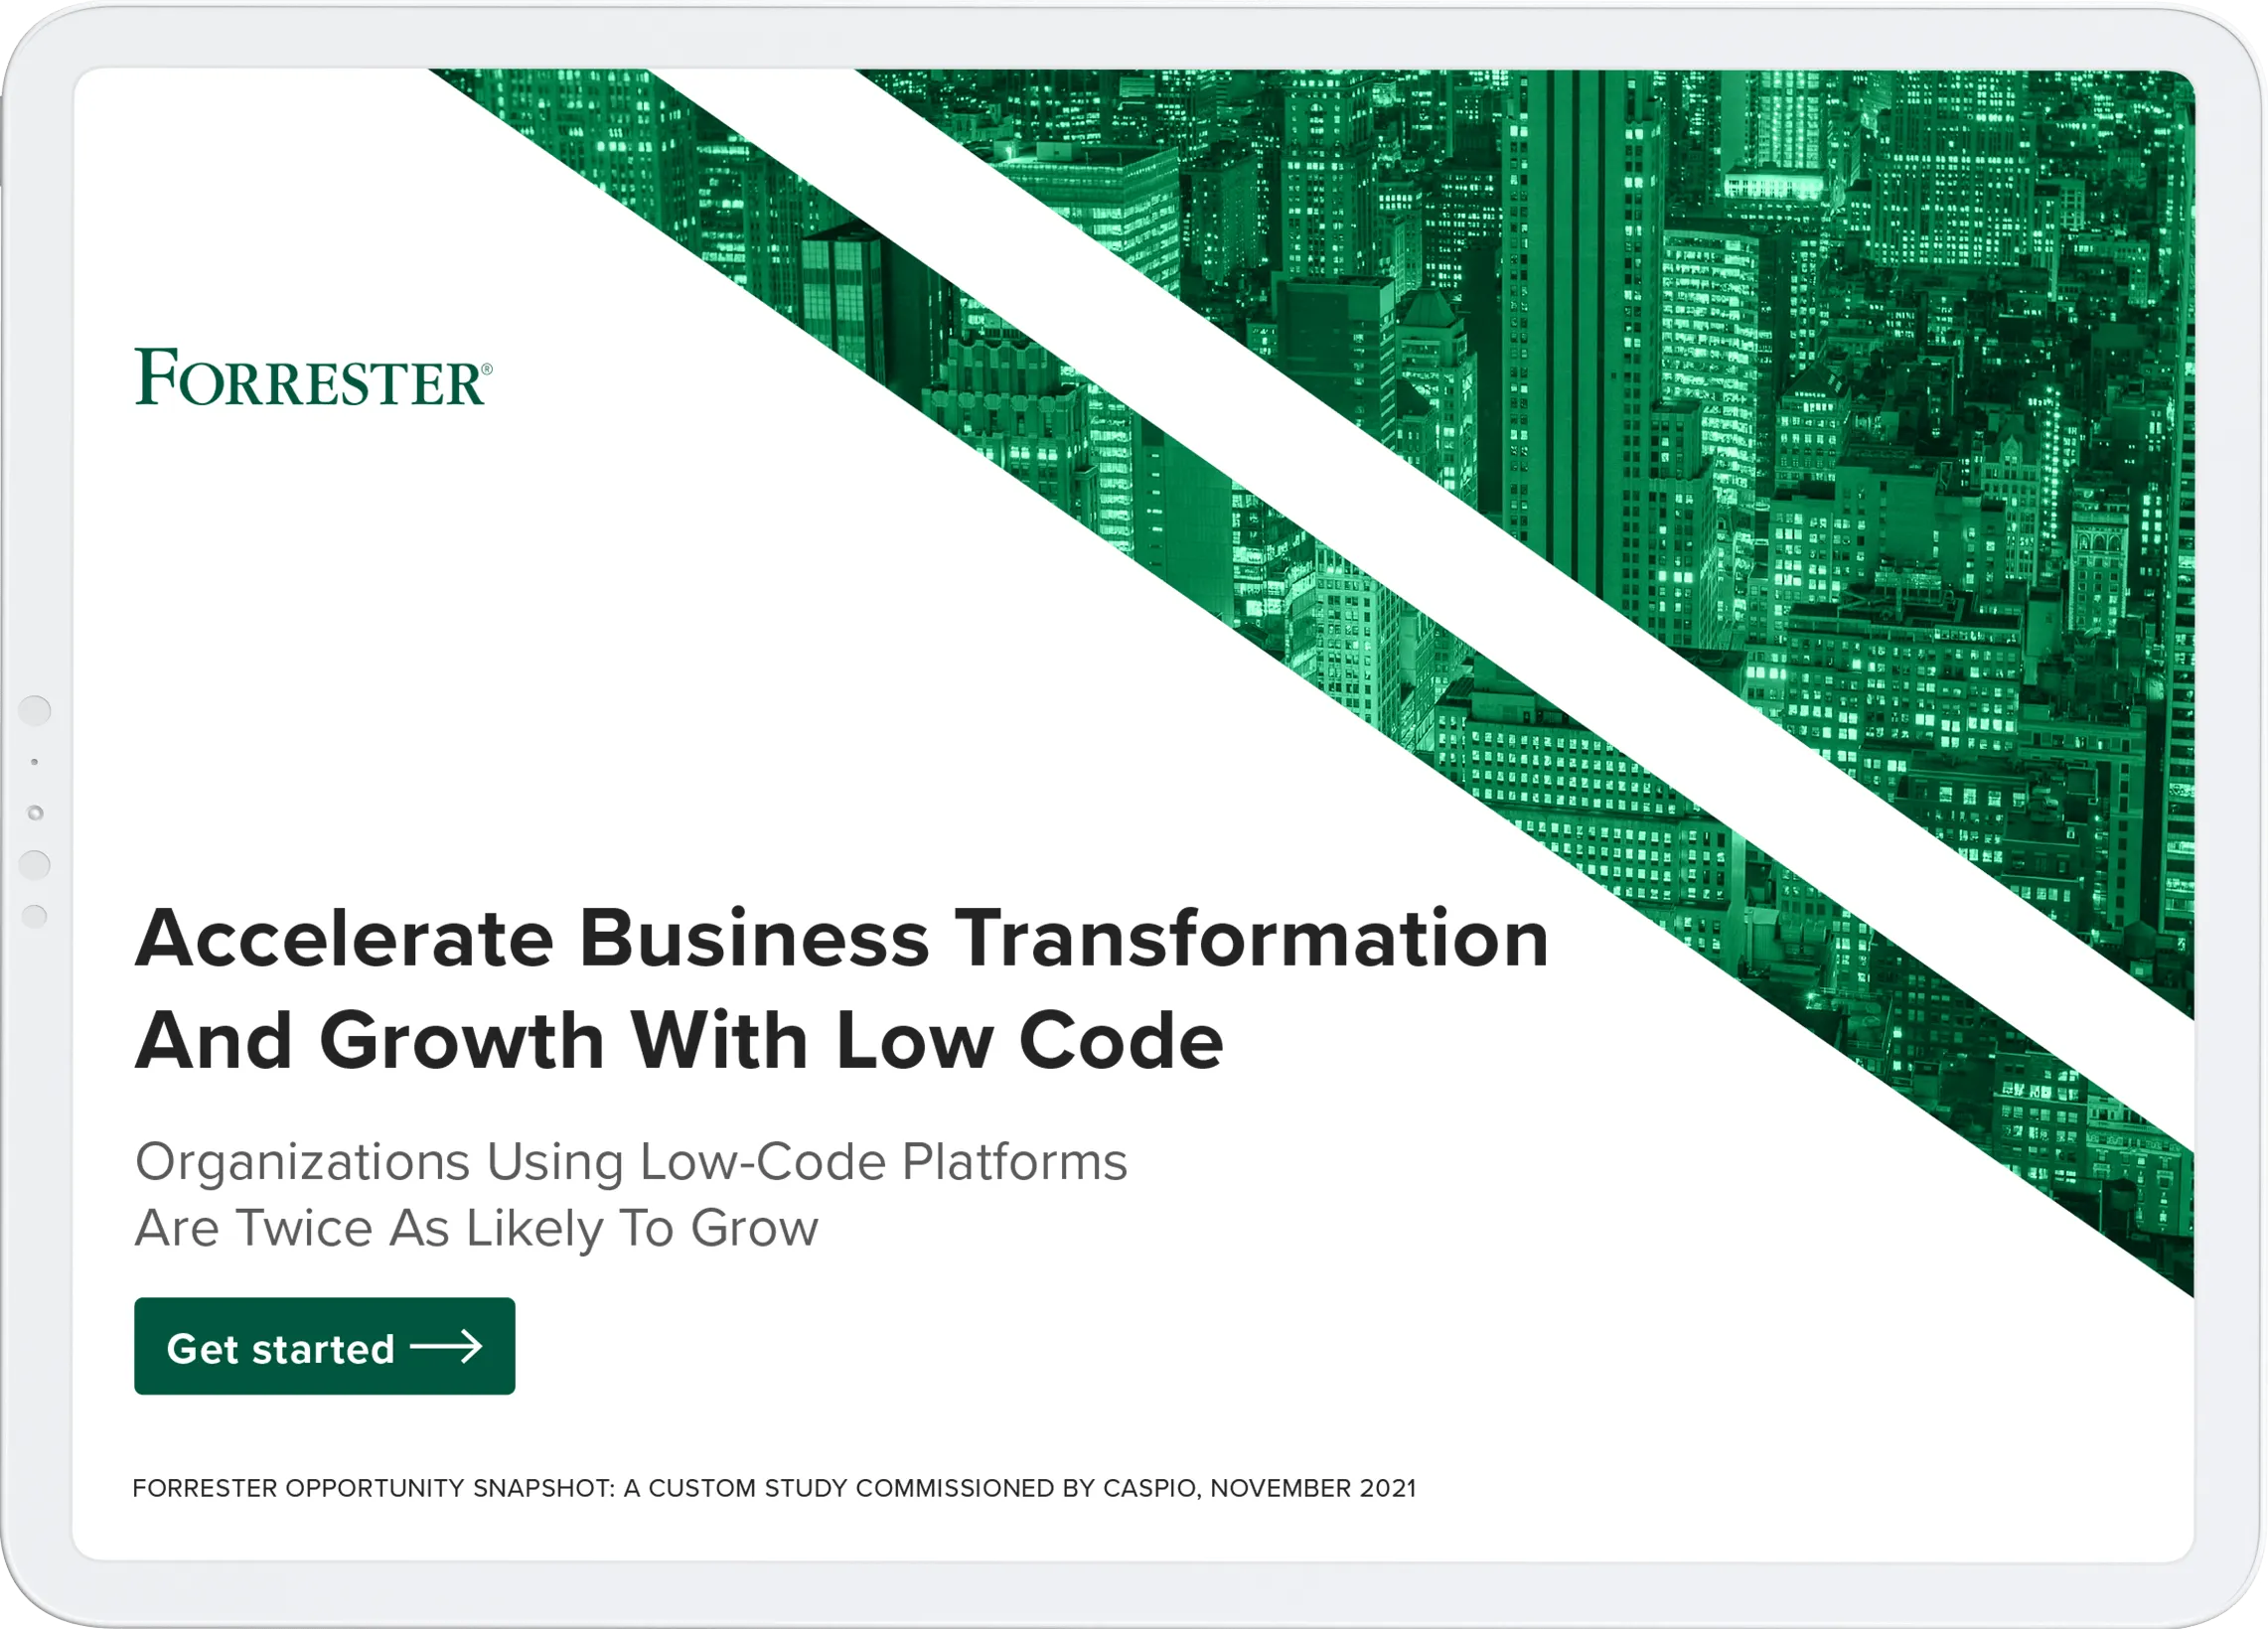 Accelerate Business Transformation and Growth With Low Code